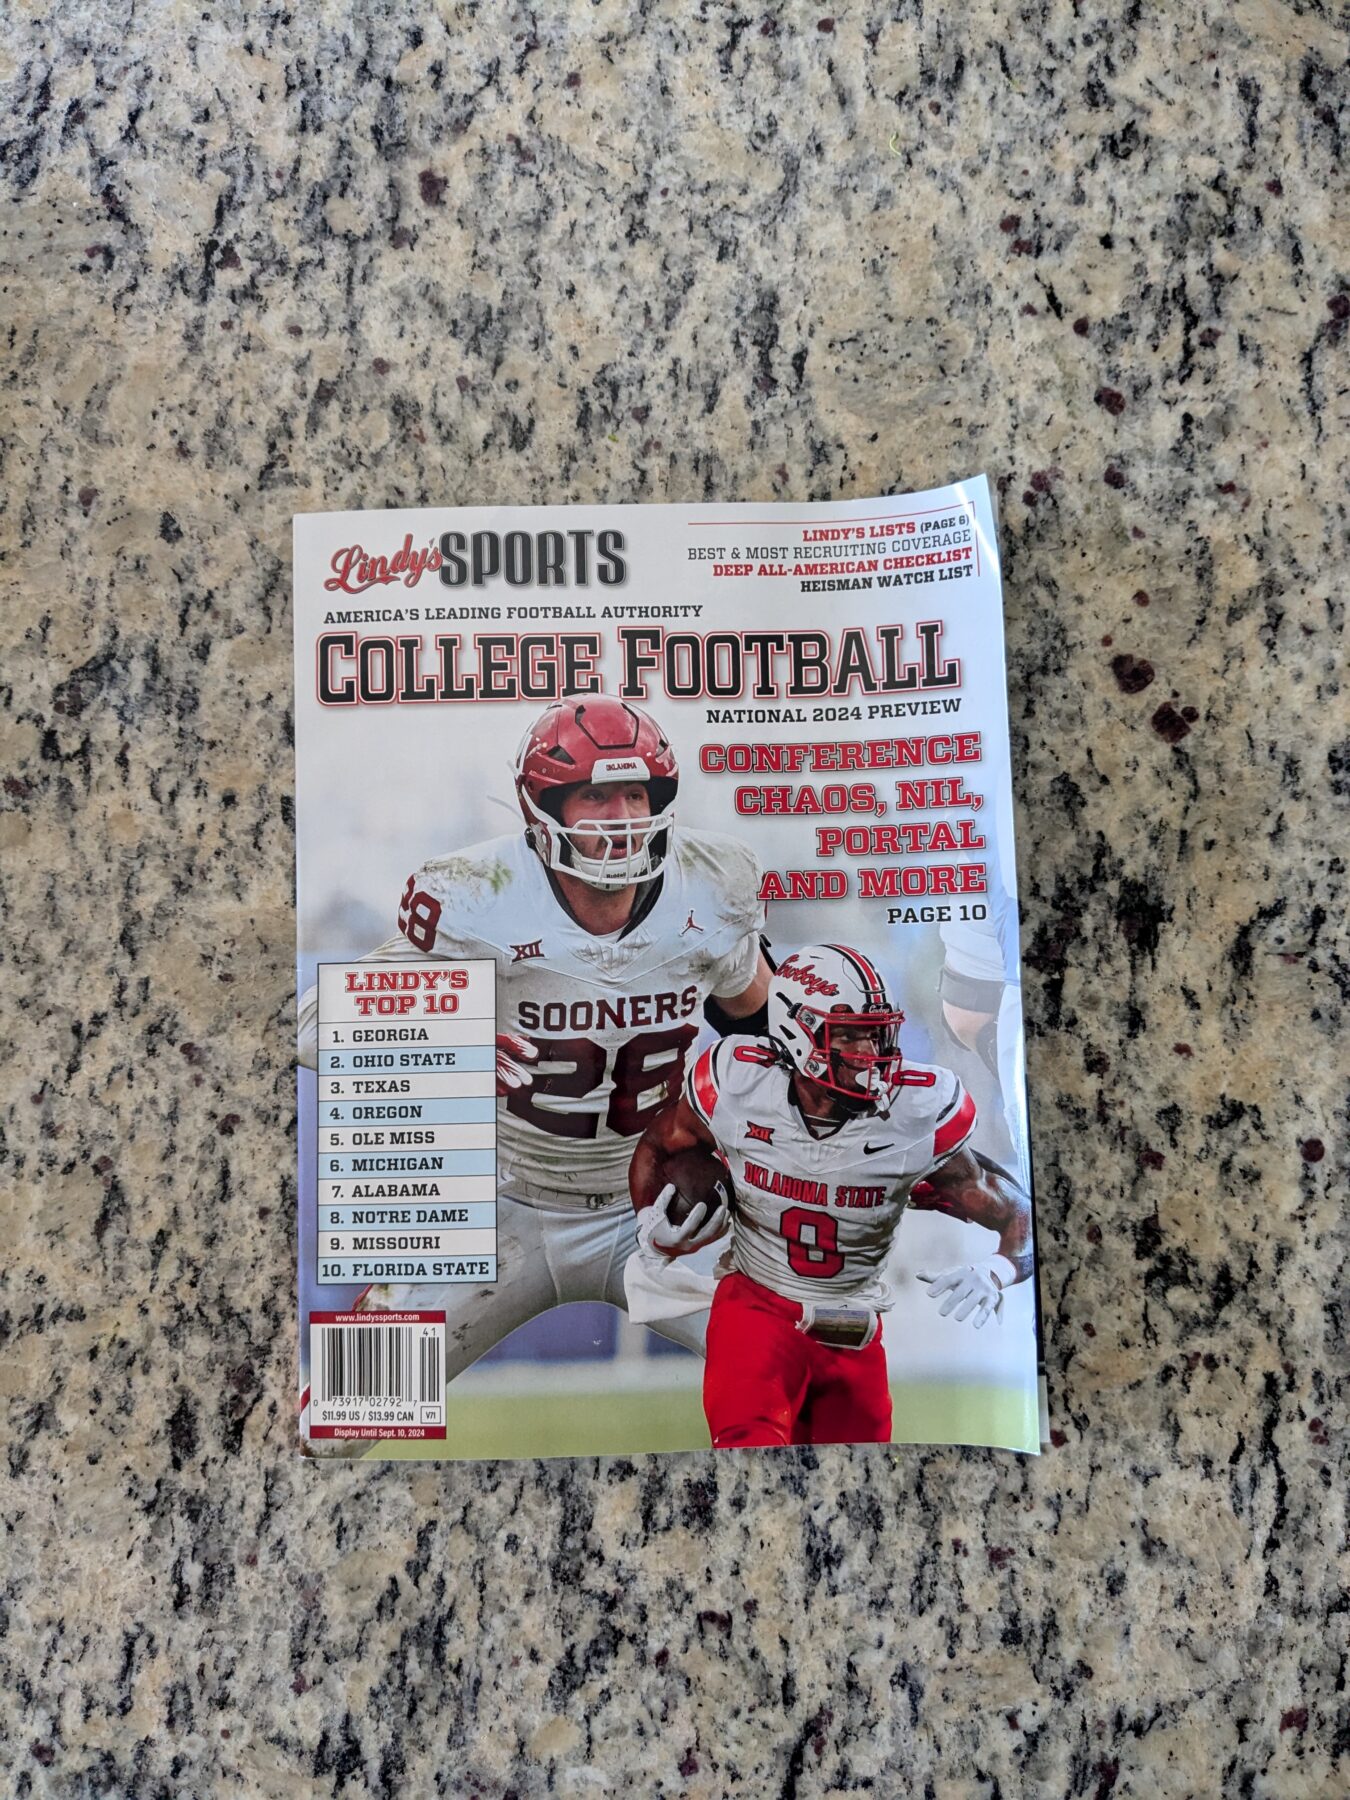 Reviewing Lindy's College Football Magazine - Blog - Square Bettor